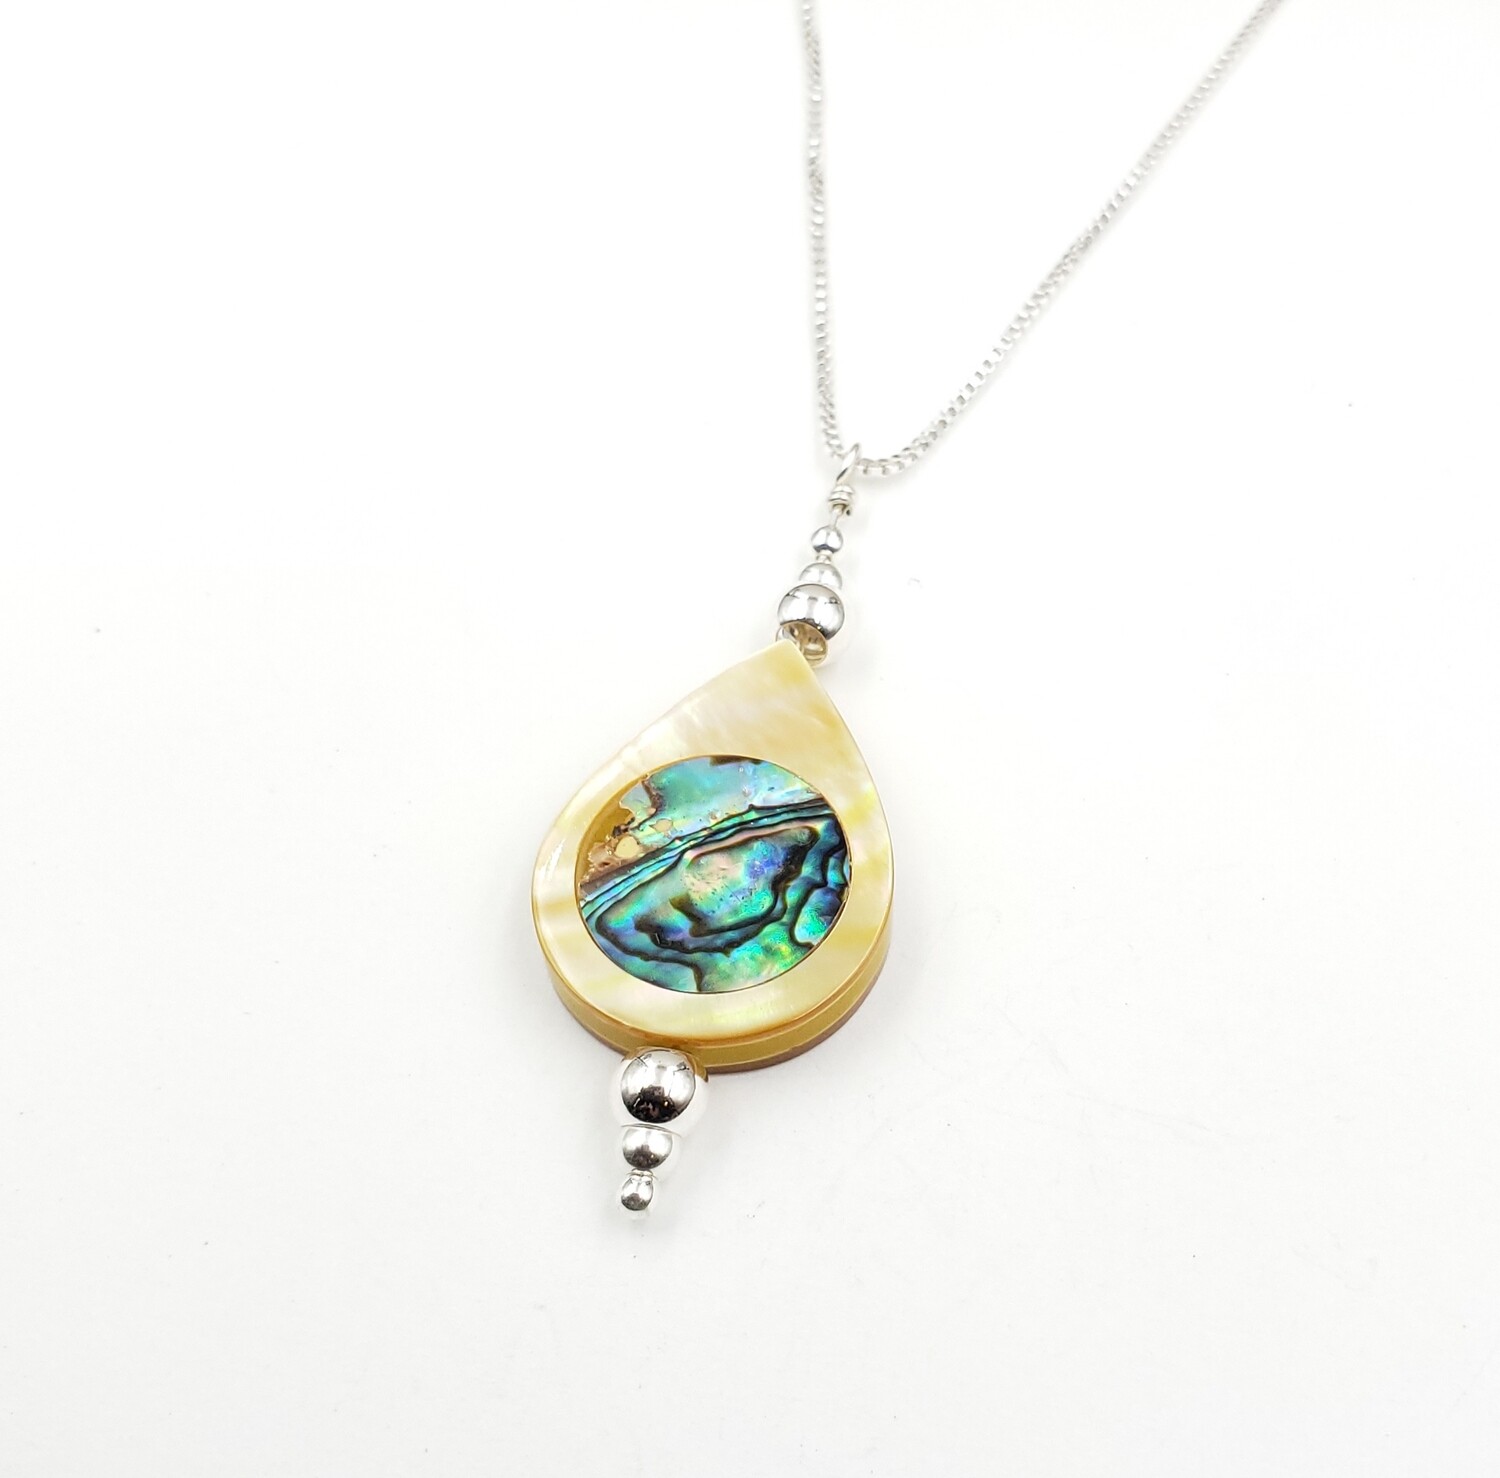 Mother of Pearl Teardrop with Abalone Inlay Necklace with Silver Beads